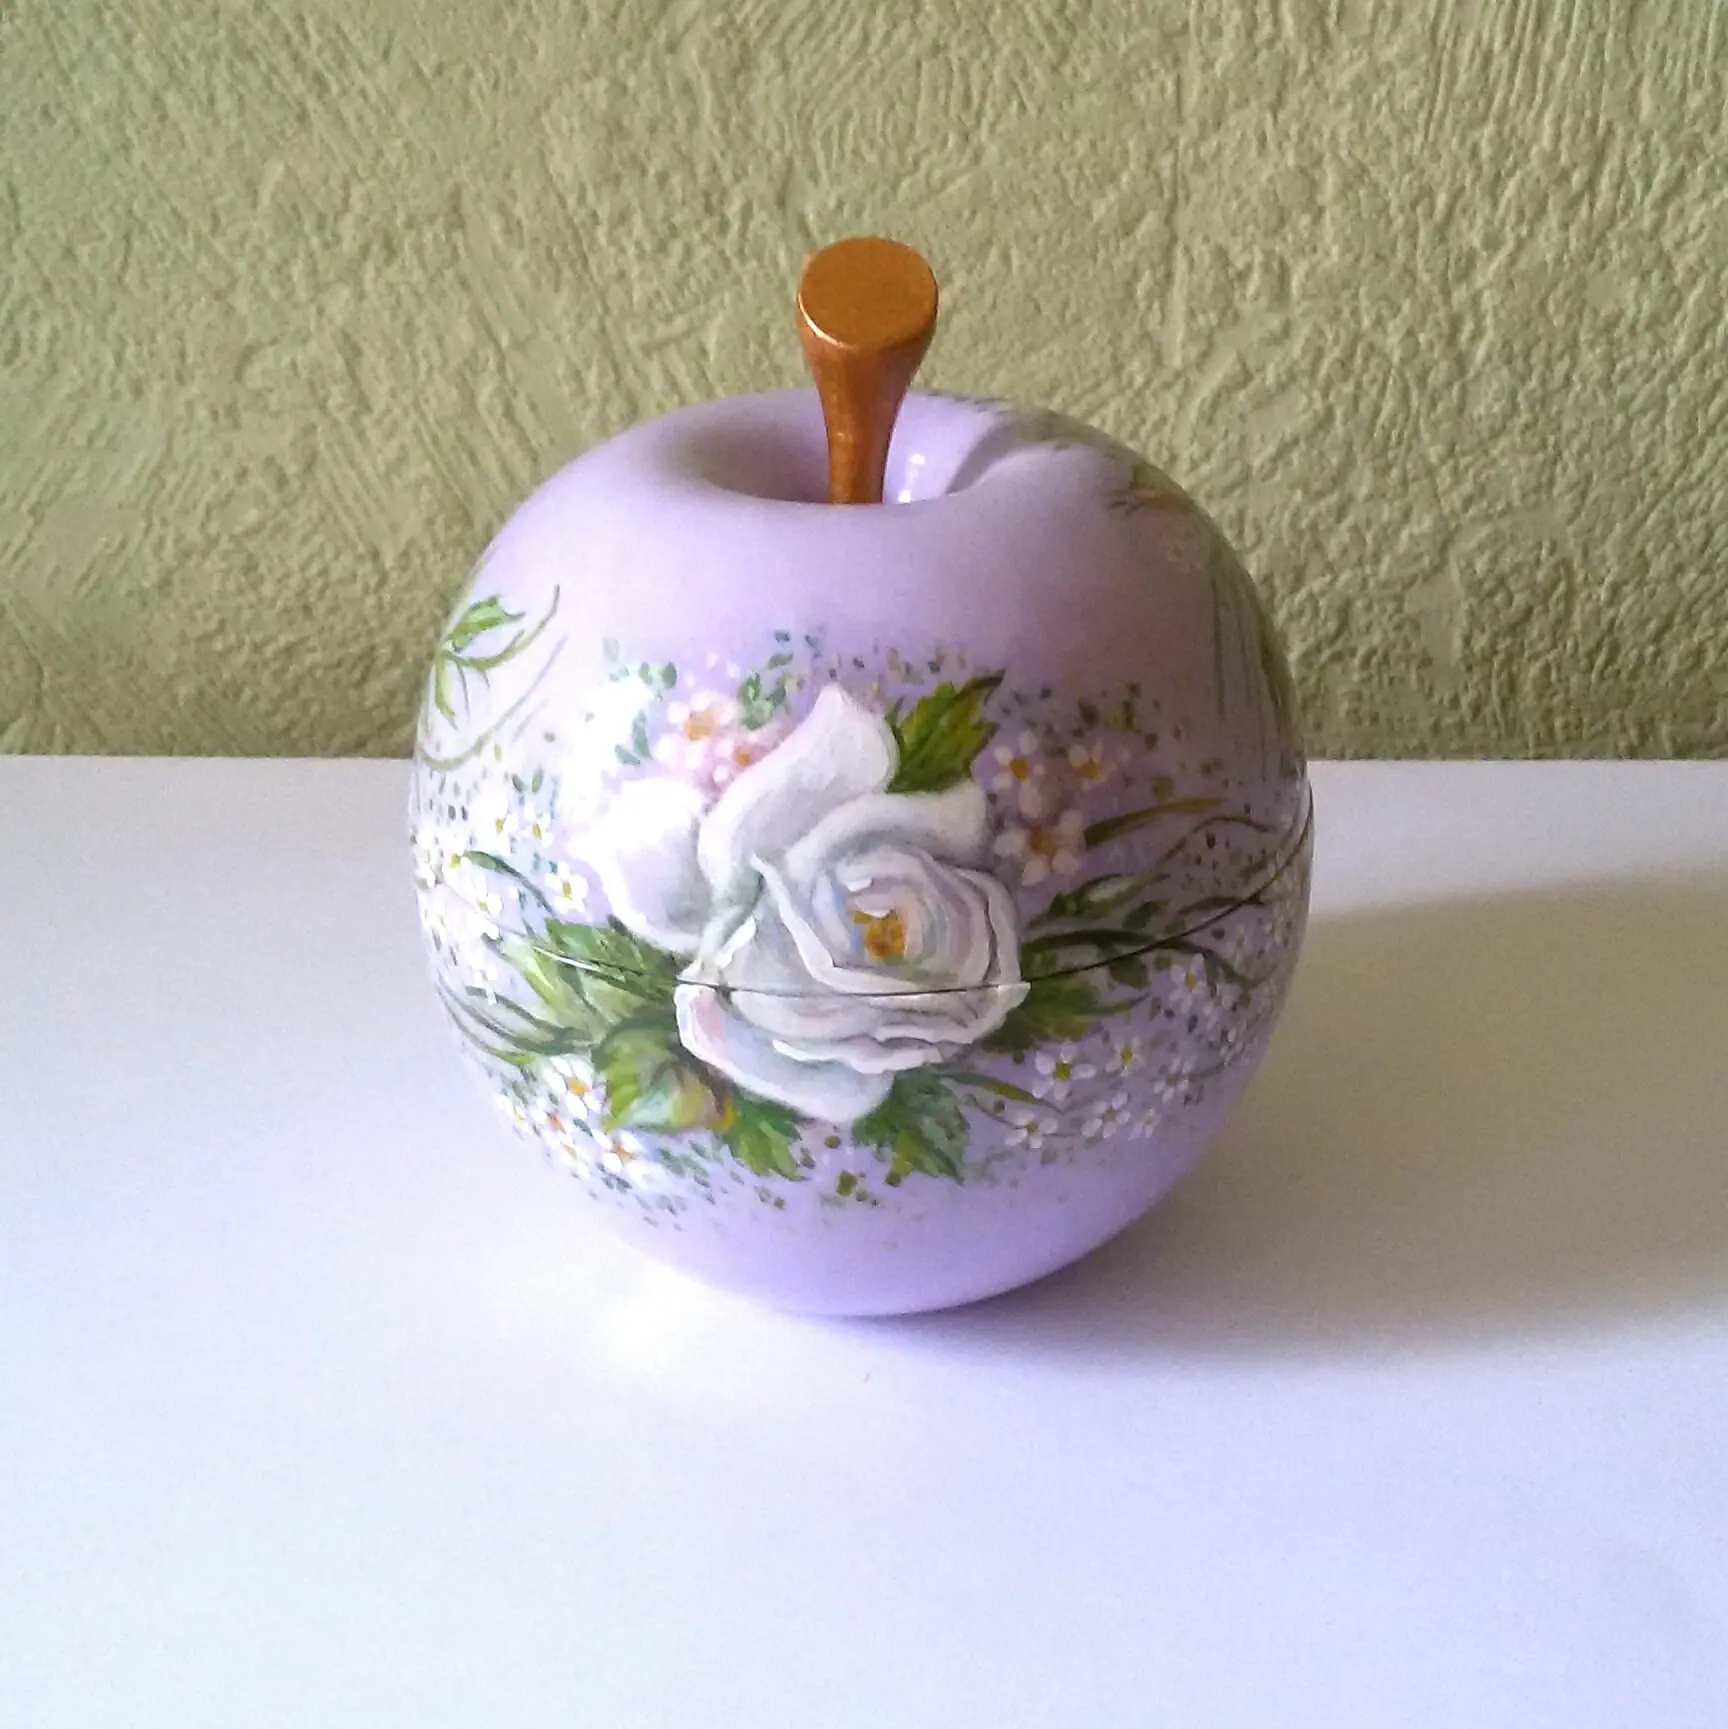 Apple-shaped jewelry box . Delicate roses painted by hand .